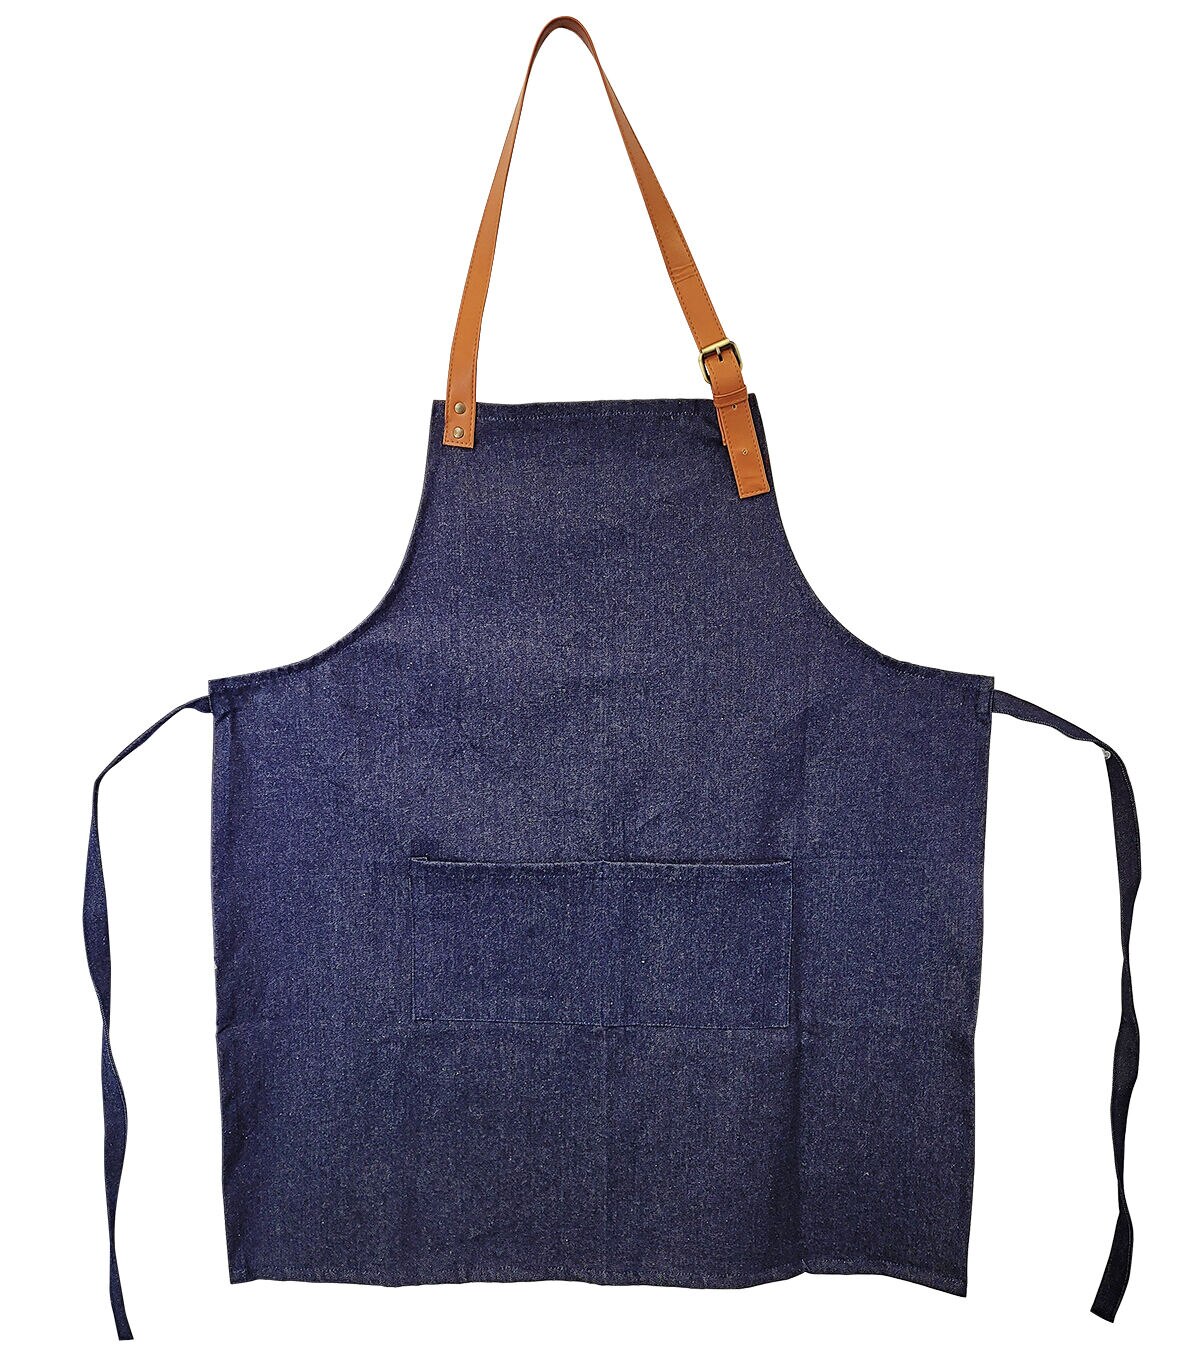 PERSONALIZED APRON for Men, Denim With Cross-back Leather Straps, Mens Apron,  Custom Logo, Text, Work Clothes for Barista, Waiters, Shefs - Etsy